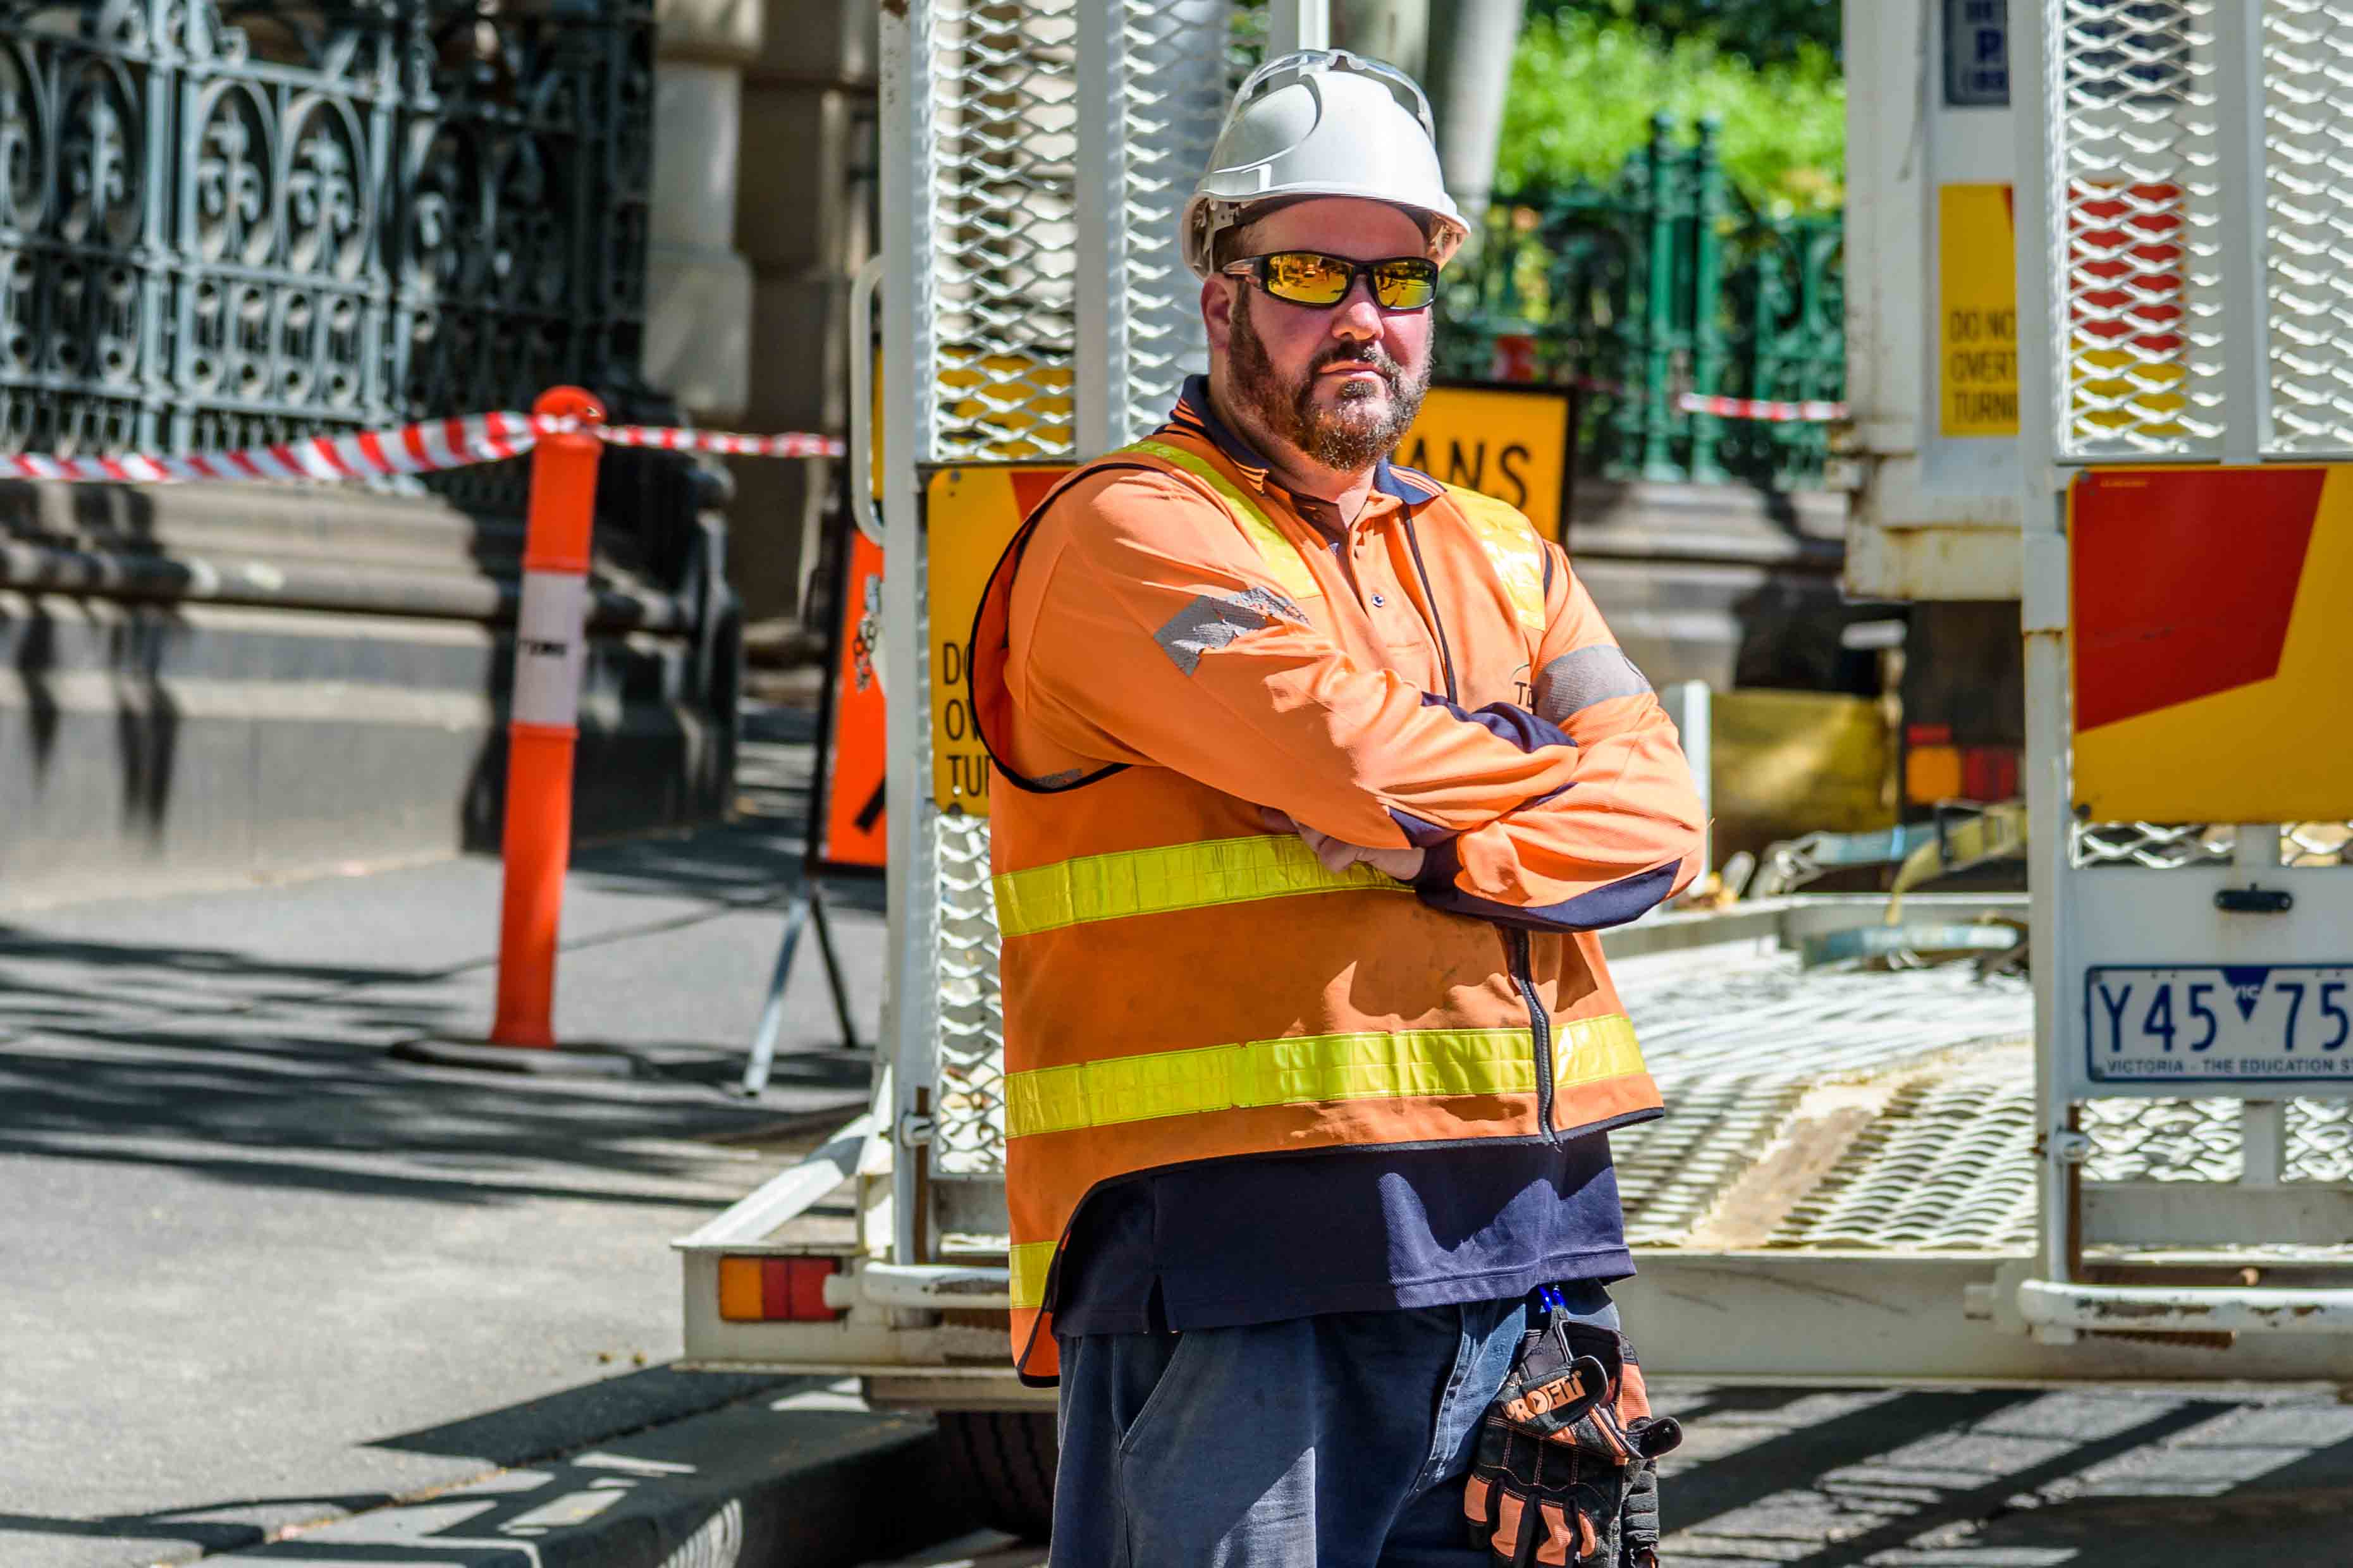 Photo shows a man at a work site. He is wearing high-vis clothing, a hard hat and sunglasses. His arms are crossed in front of him.